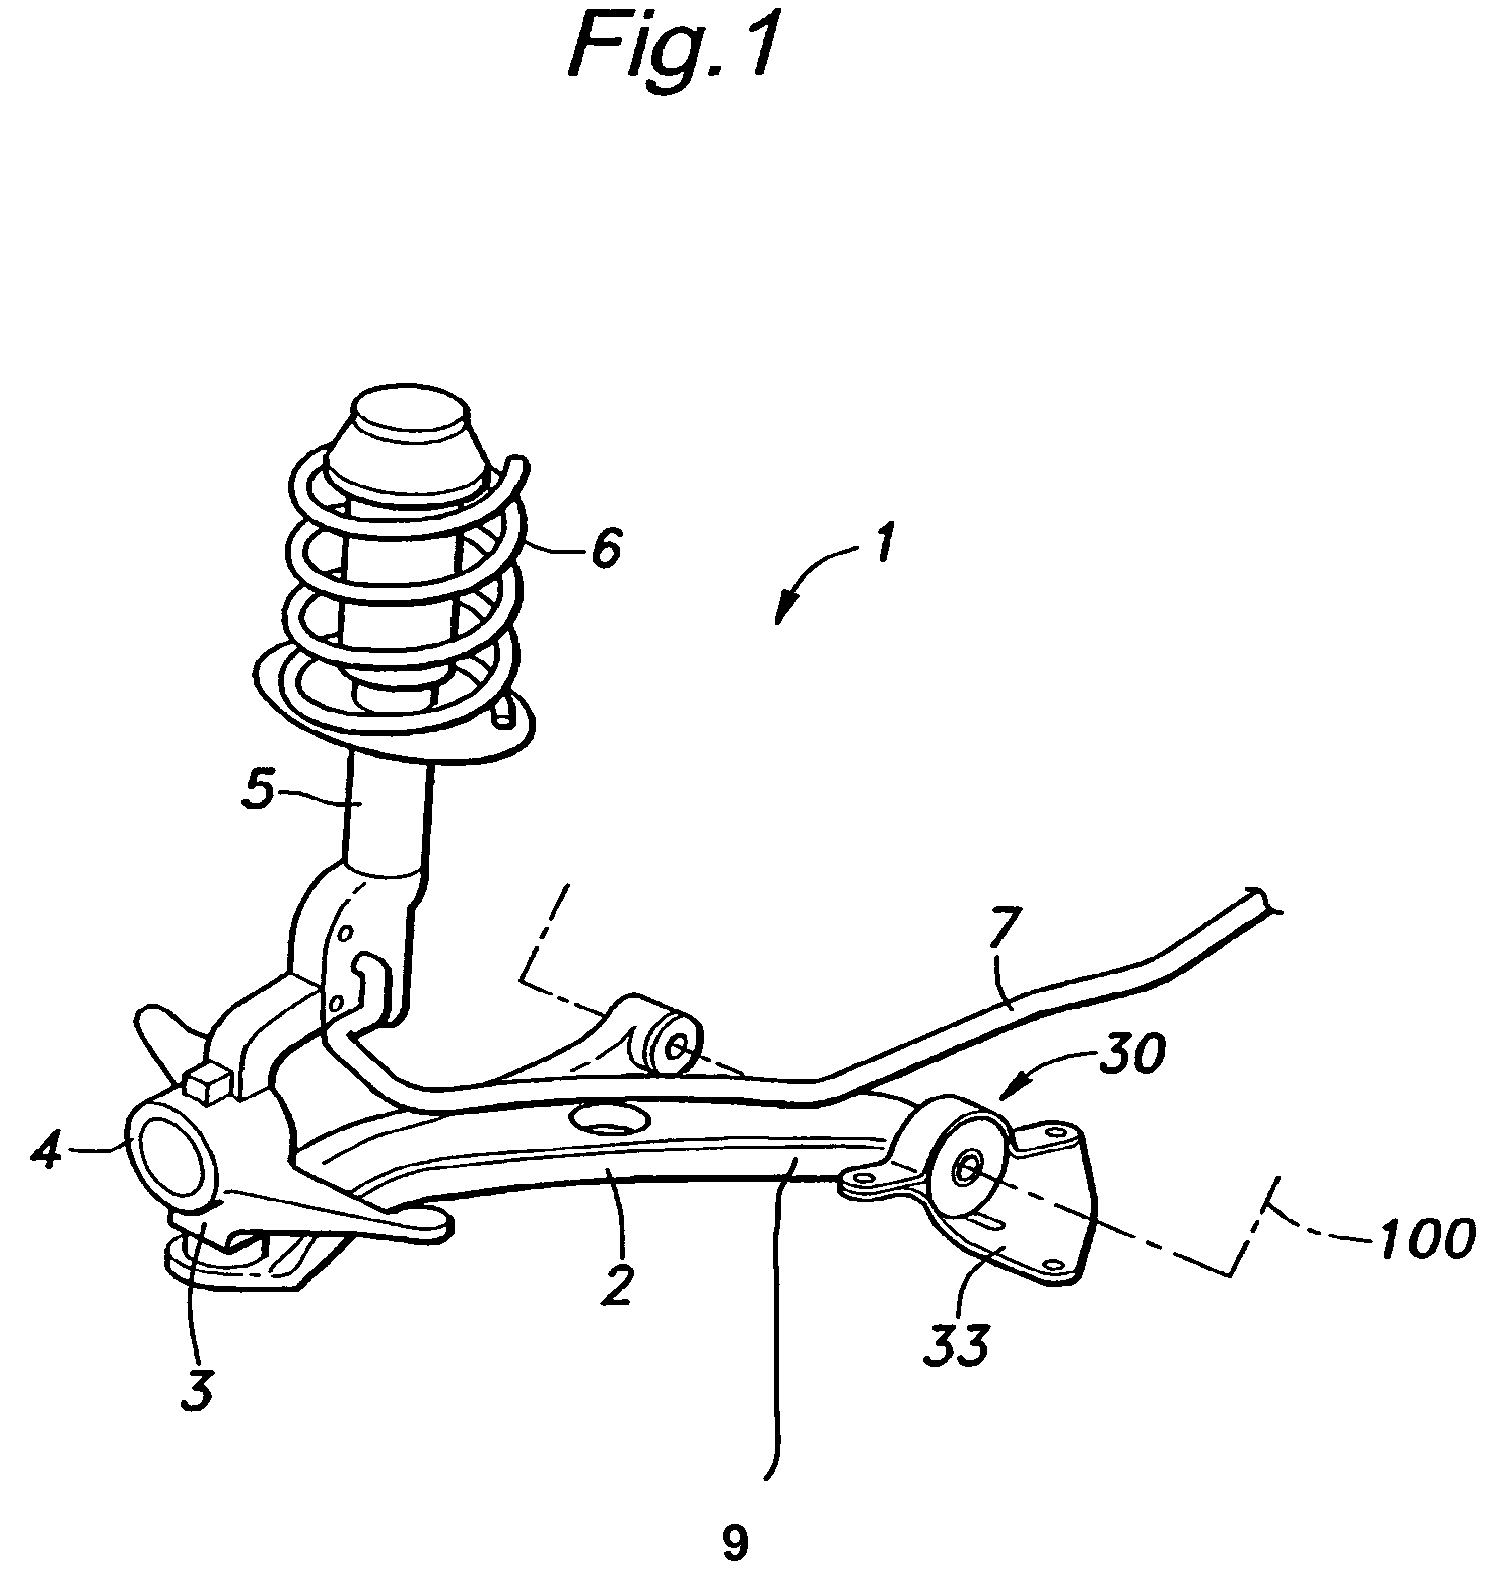 Suspension arm having a shaft projecting therefrom and method for press fitting the shaft into a bore of another member